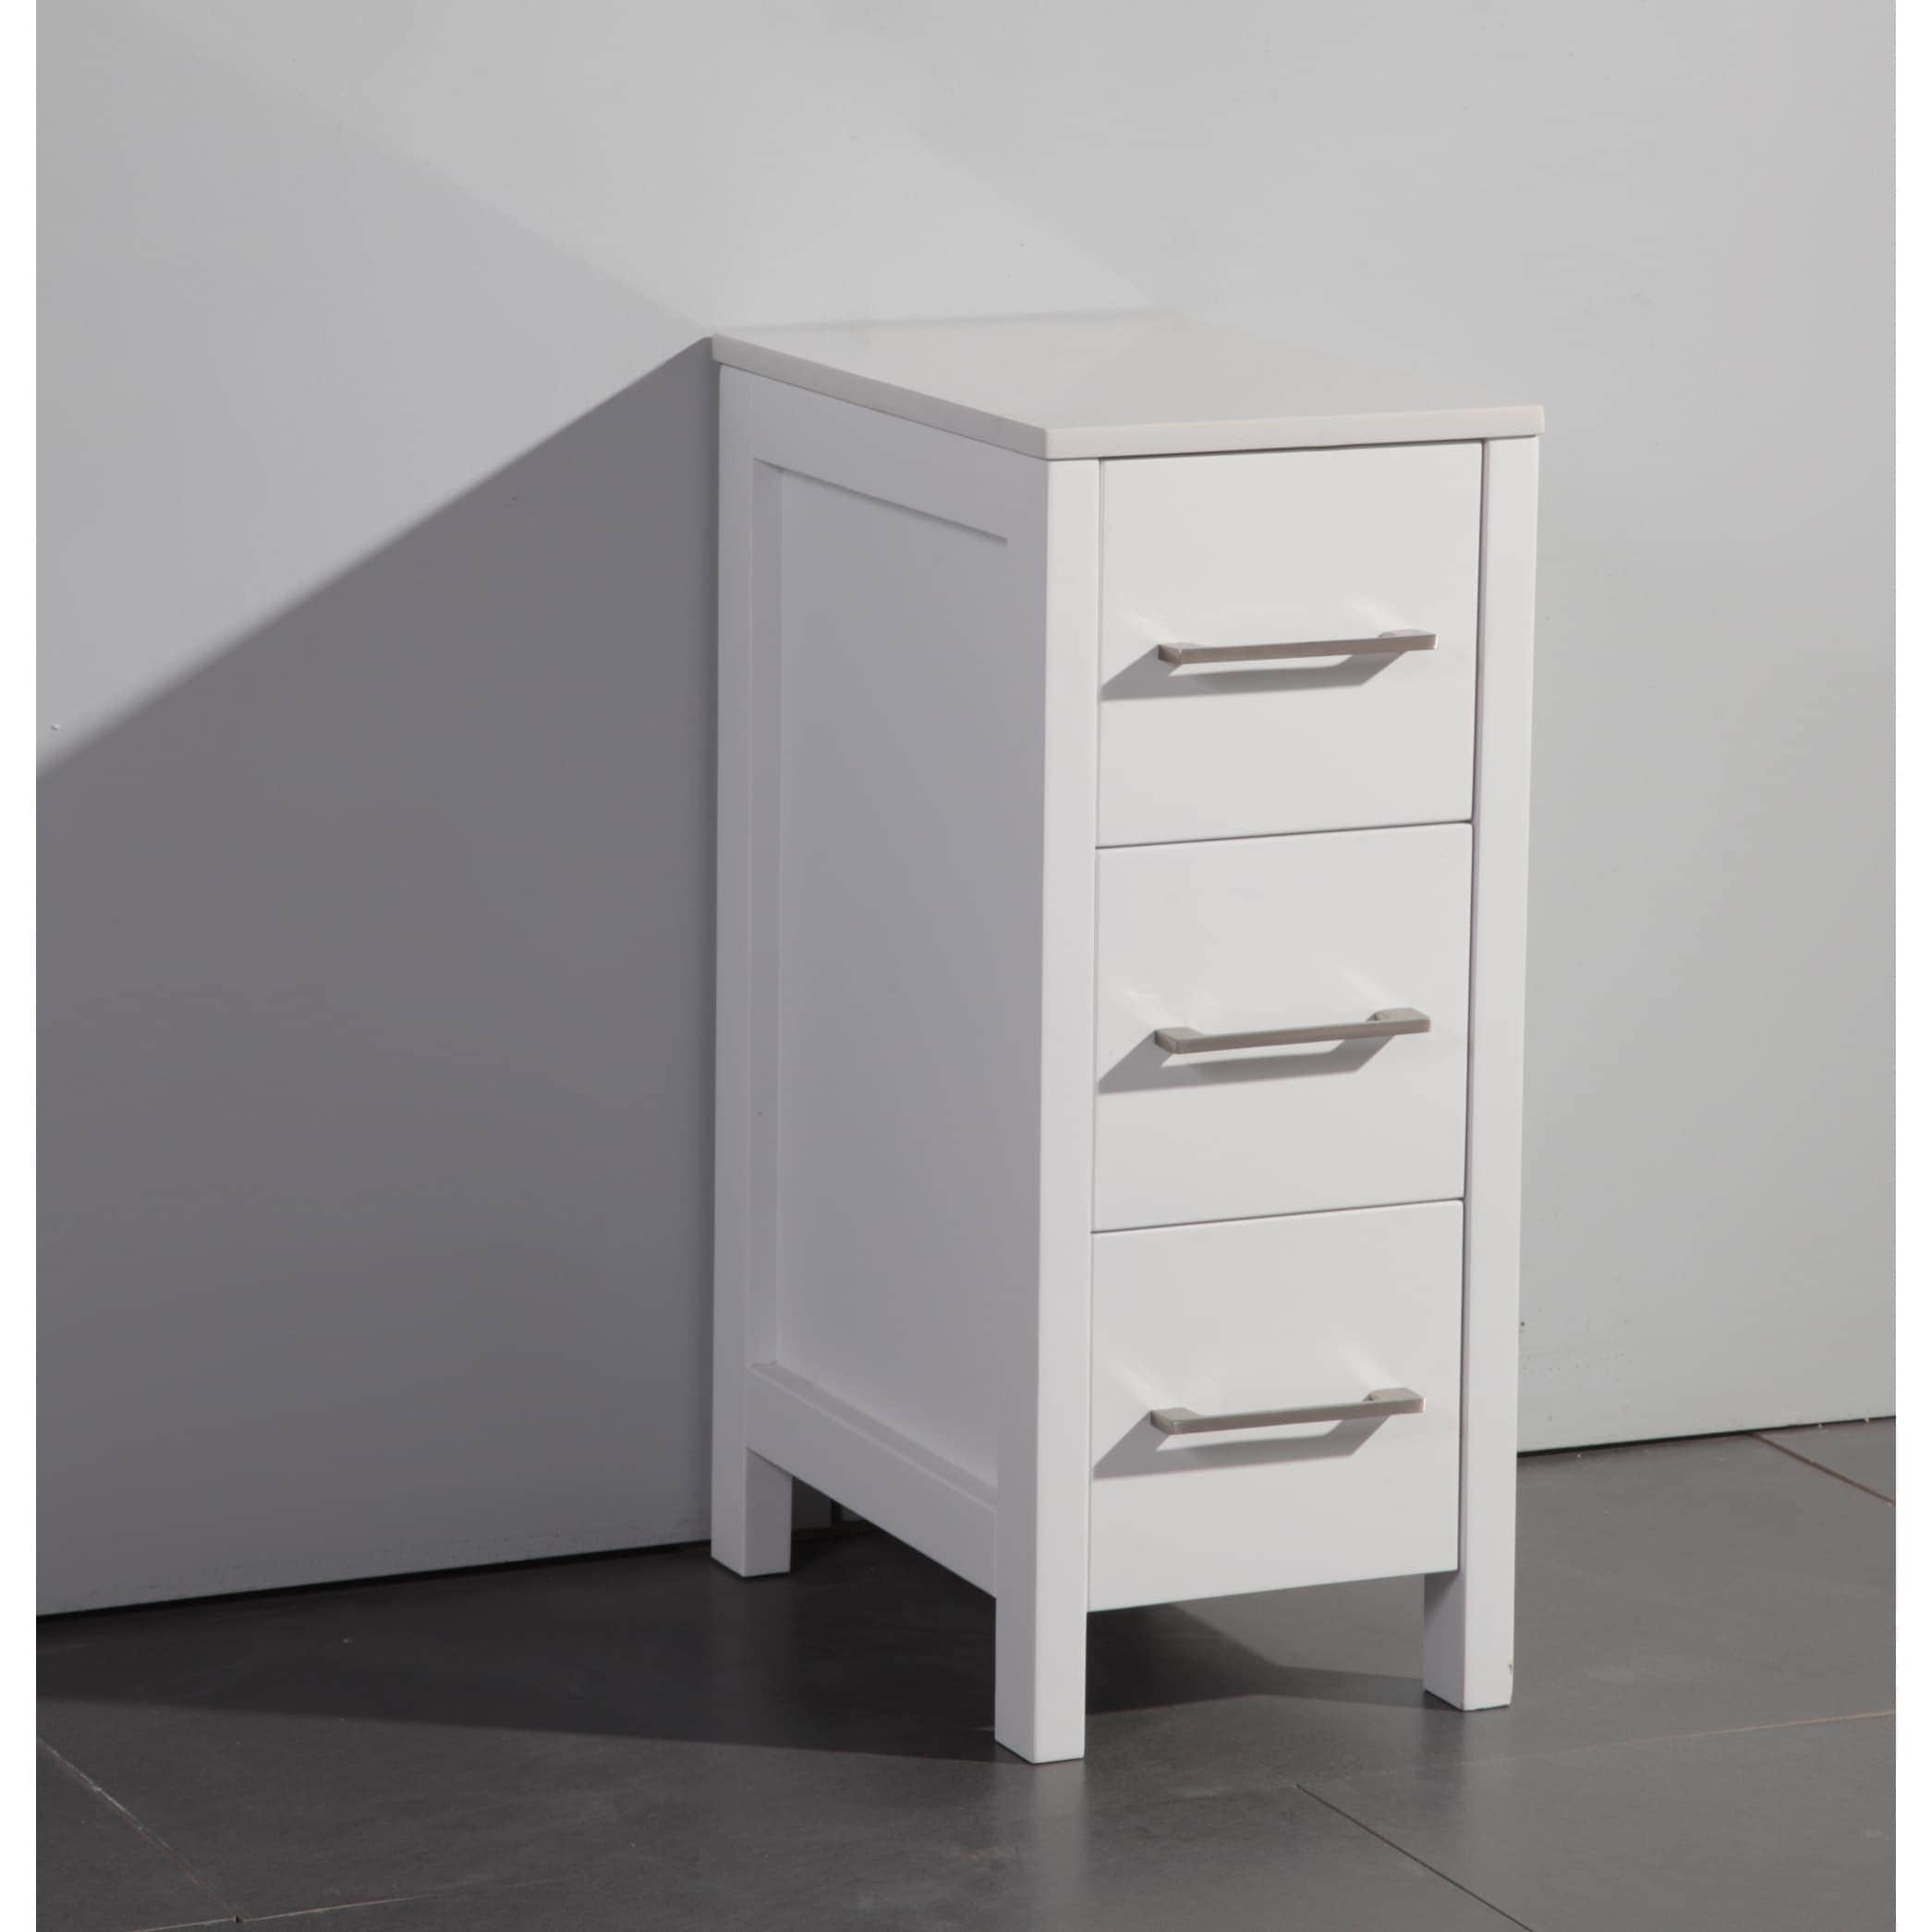 https://ak1.ostkcdn.com/images/products/is/images/direct/7bba5a6732f7d3960dcffe9bbbe77246e841ebf0/Vanity-Art-12-Inch-Bathroom-Vanity-Cabinet-3-Drawer-Side-Storage-Organizer-Freestanding-Single-Vanity-Bedroom-Bathroom-Entryway.jpg